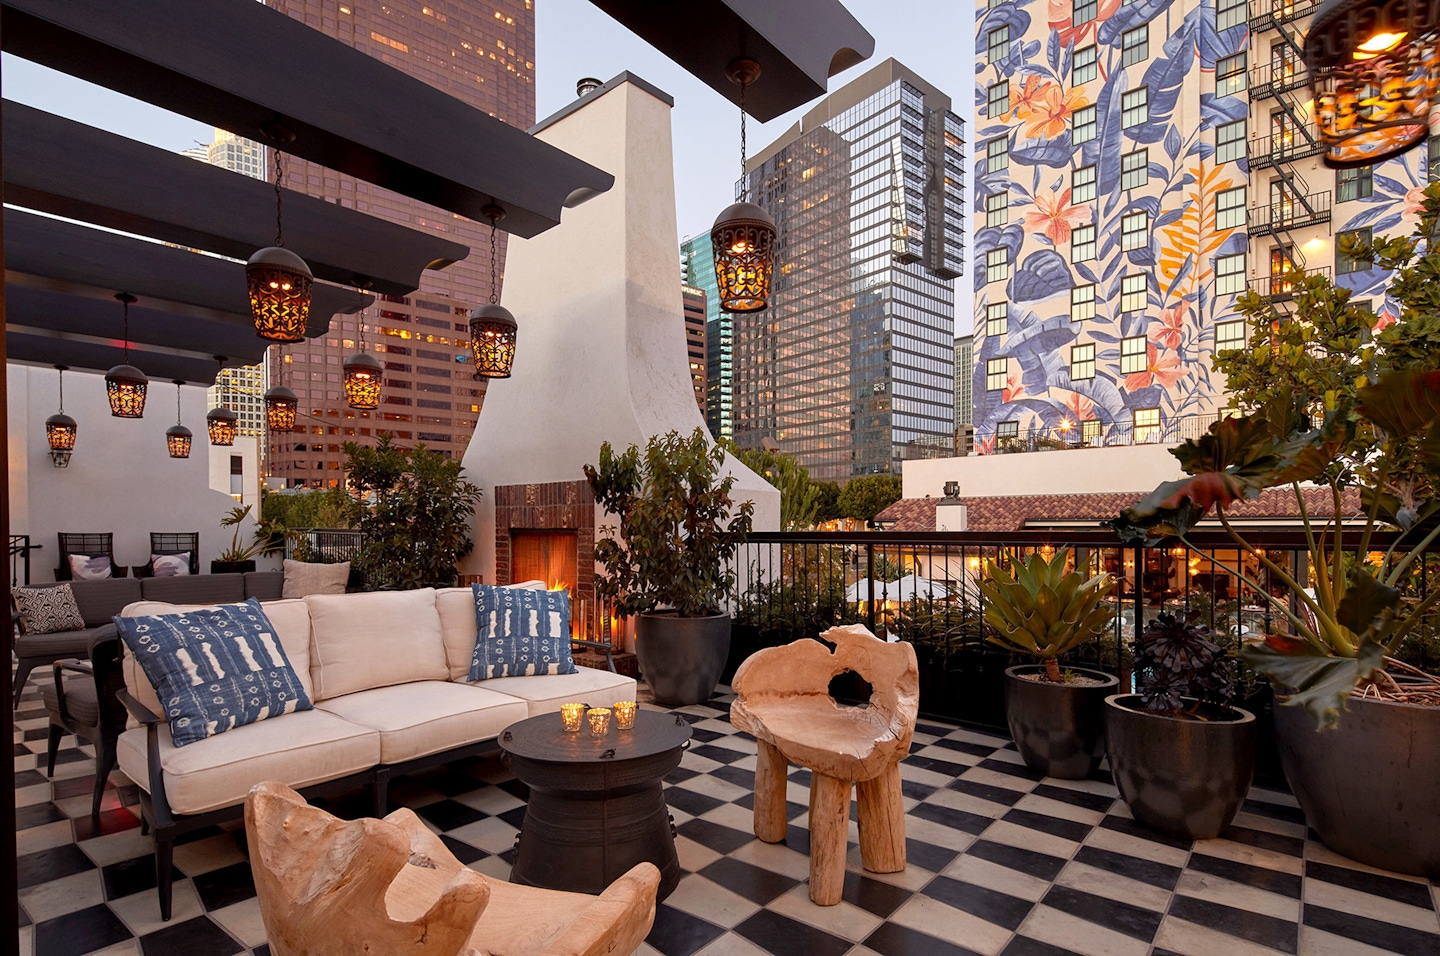 Indoor/outdoor lounge space at Rick’s, a gathering space at Hotel Figueroa, located in downtown Los Angeles | Hotel Figueroa